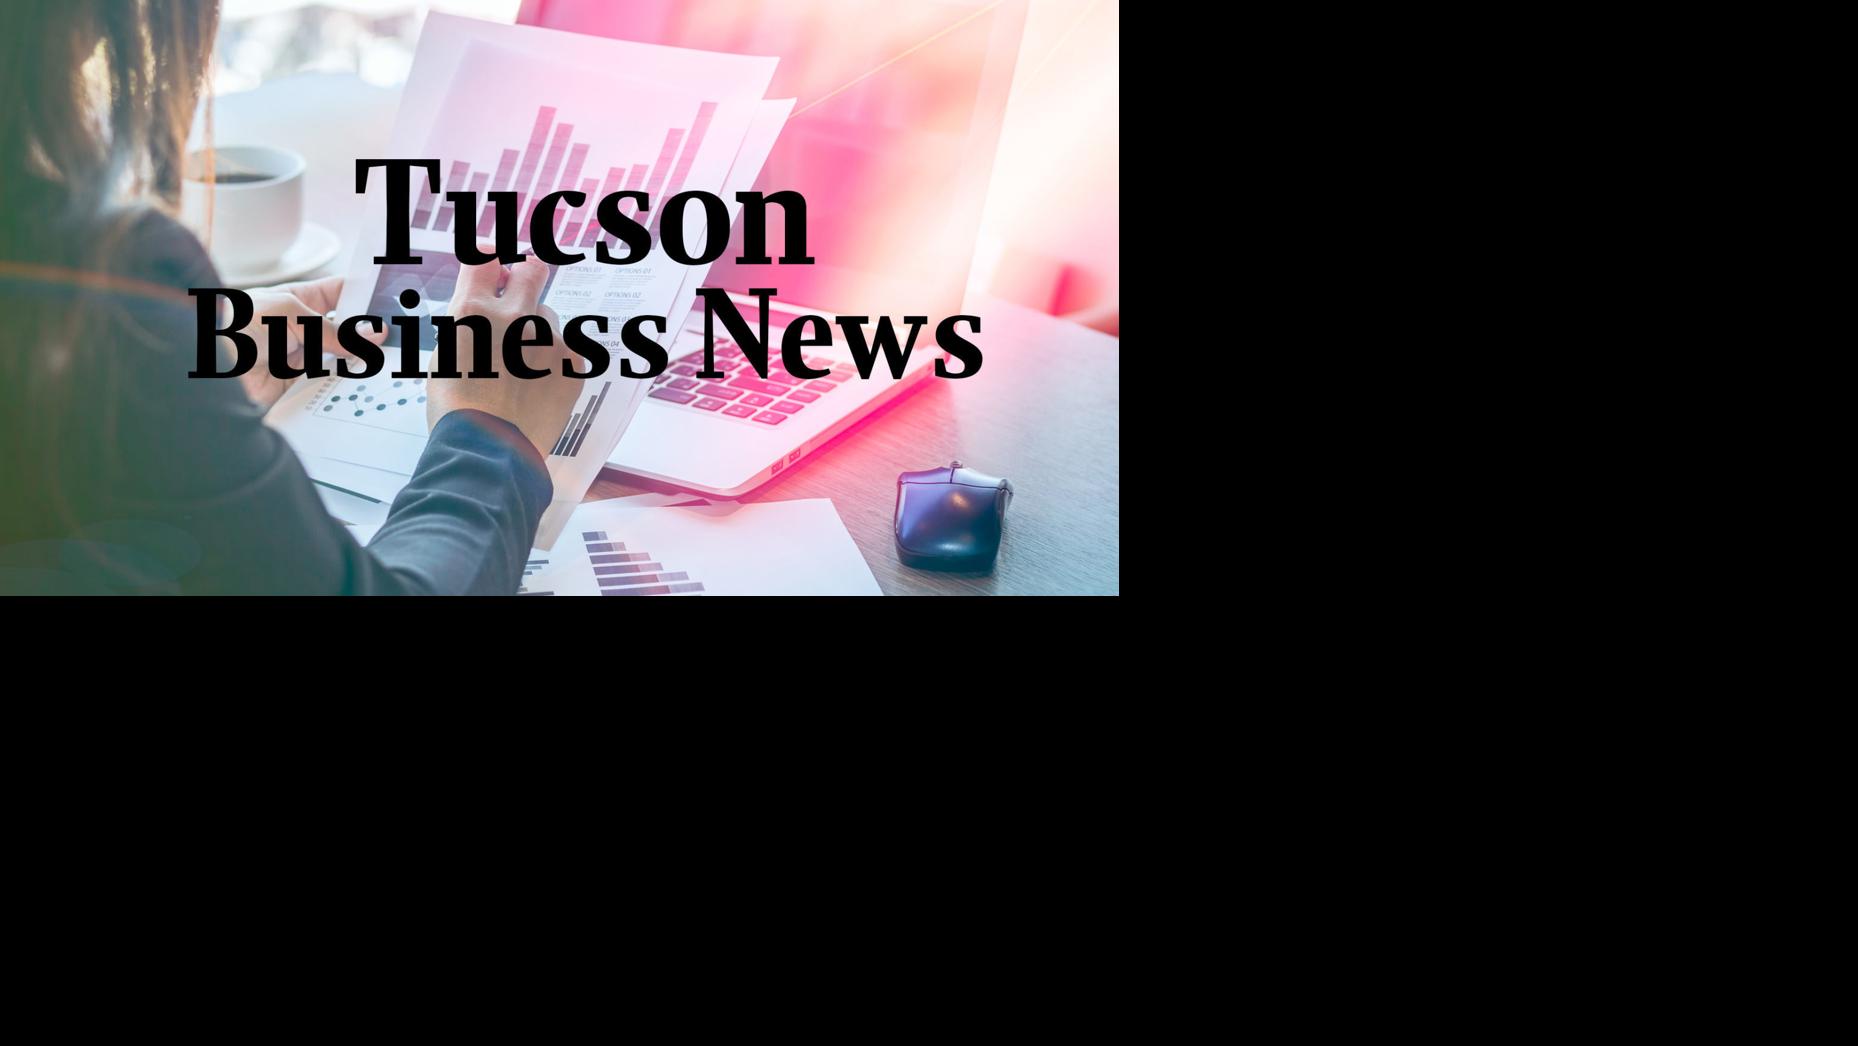 Business awards earned in Tucson and Southern Arizona